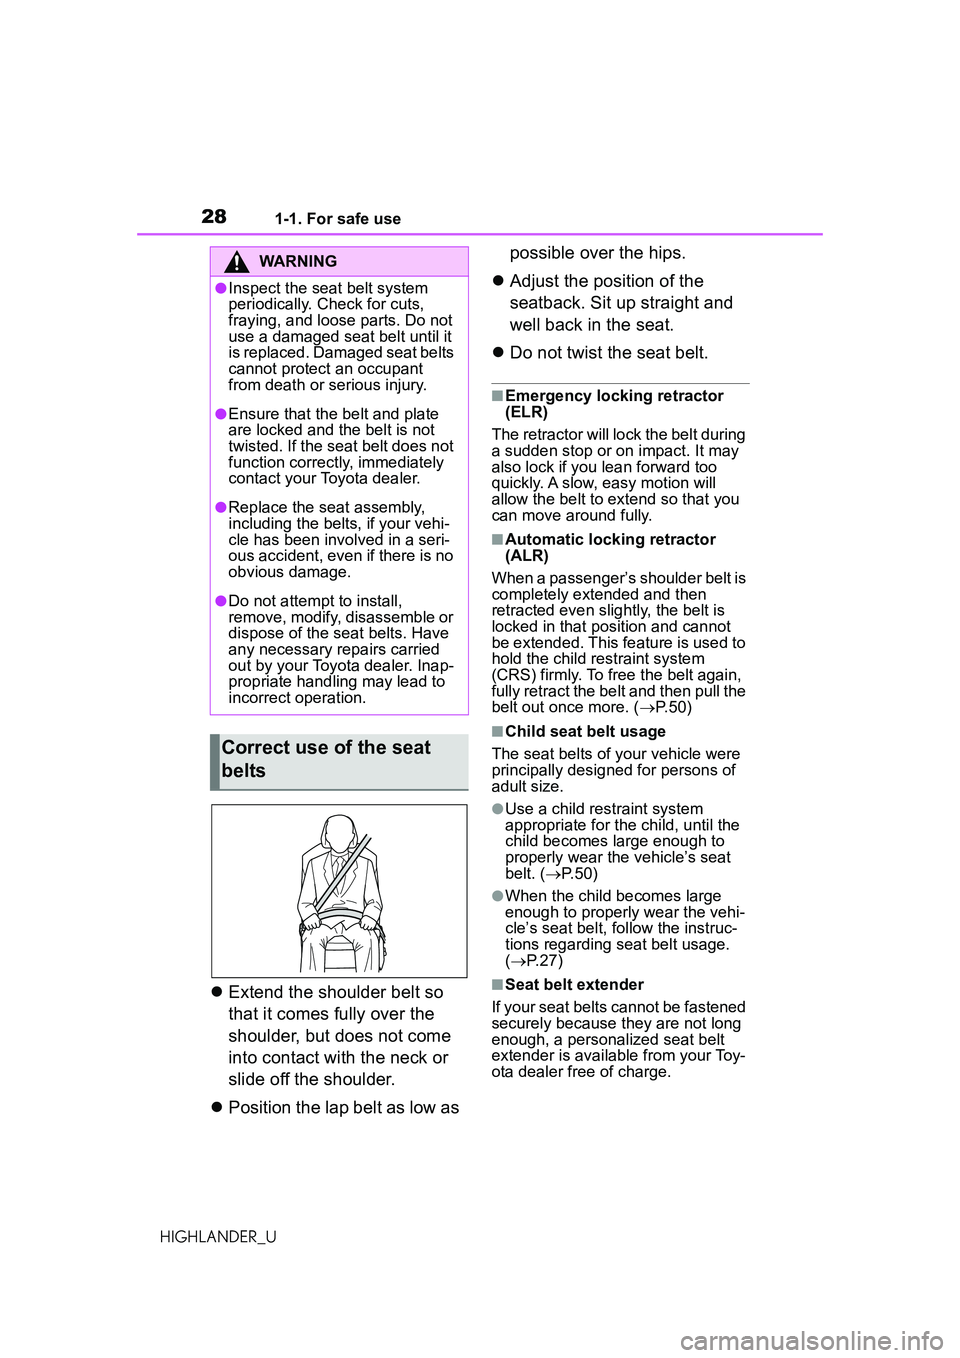 TOYOTA HIGHLANDER 2021  Owners Manual (in English) 281-1. For safe use
HIGHLANDER_U
Extend the shoulder belt so 
that it comes fully over the 
shoulder, but does not come 
into contact with the neck or 
slide off the shoulder.
 Position the lap 